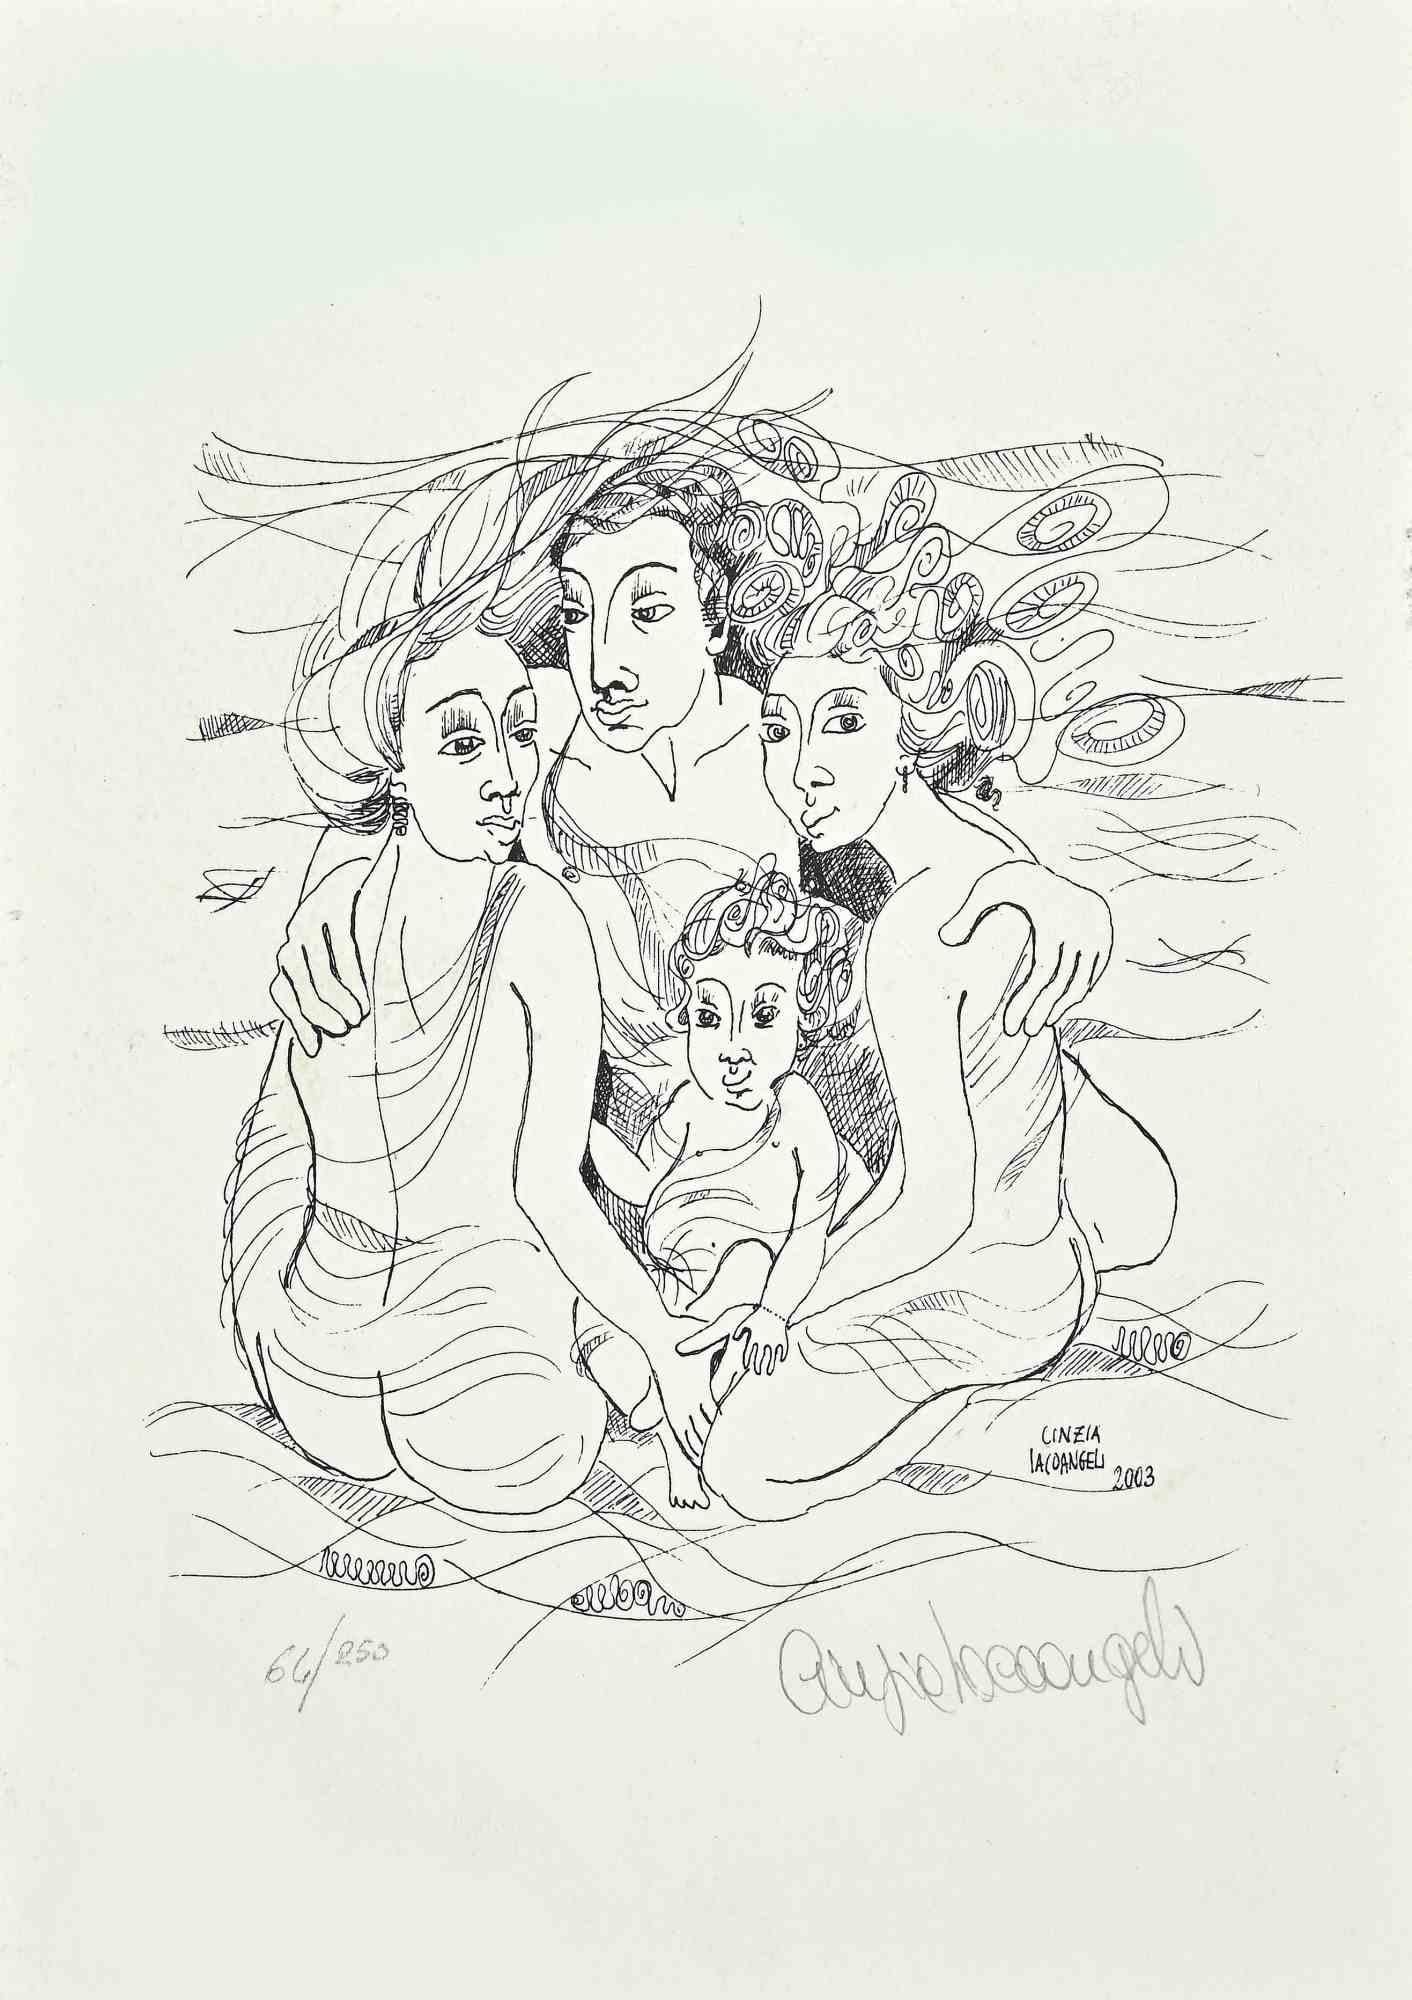 The Family is an original lithograph on paper, realized by Cinzia Iacoangeli in 2003.

The status of preservation good.

The artwork is depicted skillfully through confident and strong lines with a harmonious composition.